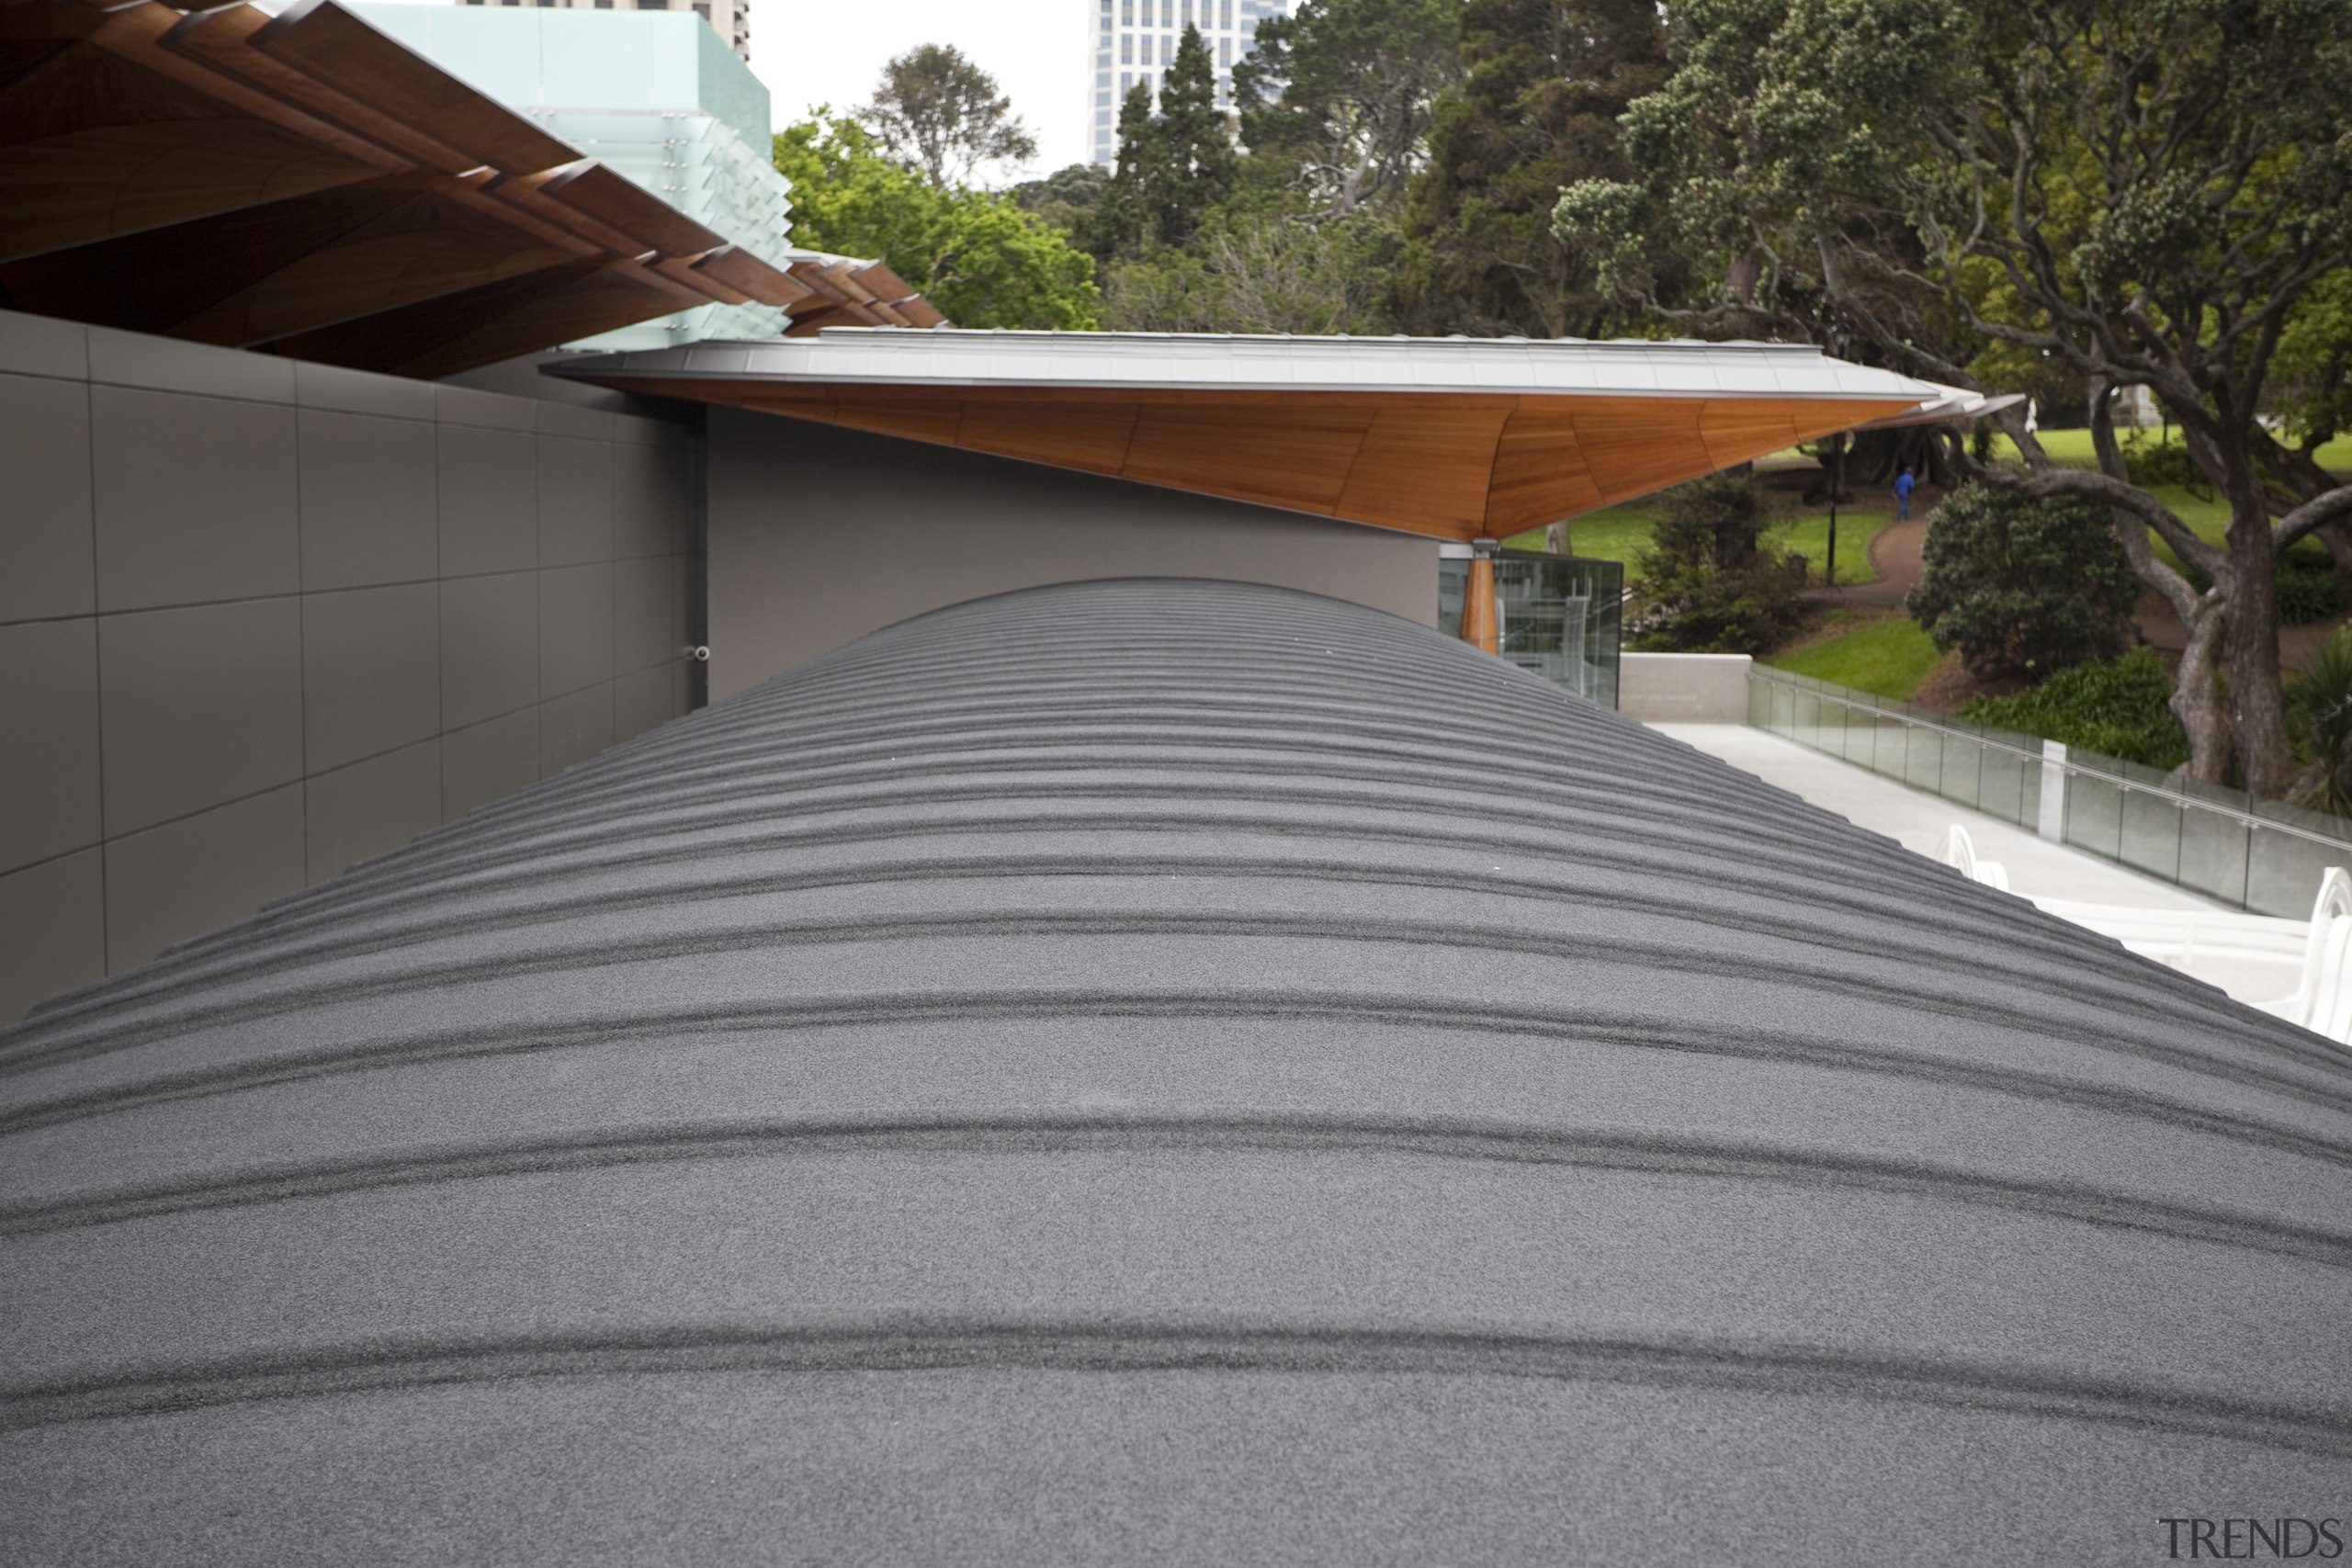 Auckland Waterproofing ensured that this, the Auckland Art architecture, asphalt, automotive exterior, daylighting, house, outdoor structure, road surface, roof, wood, gray